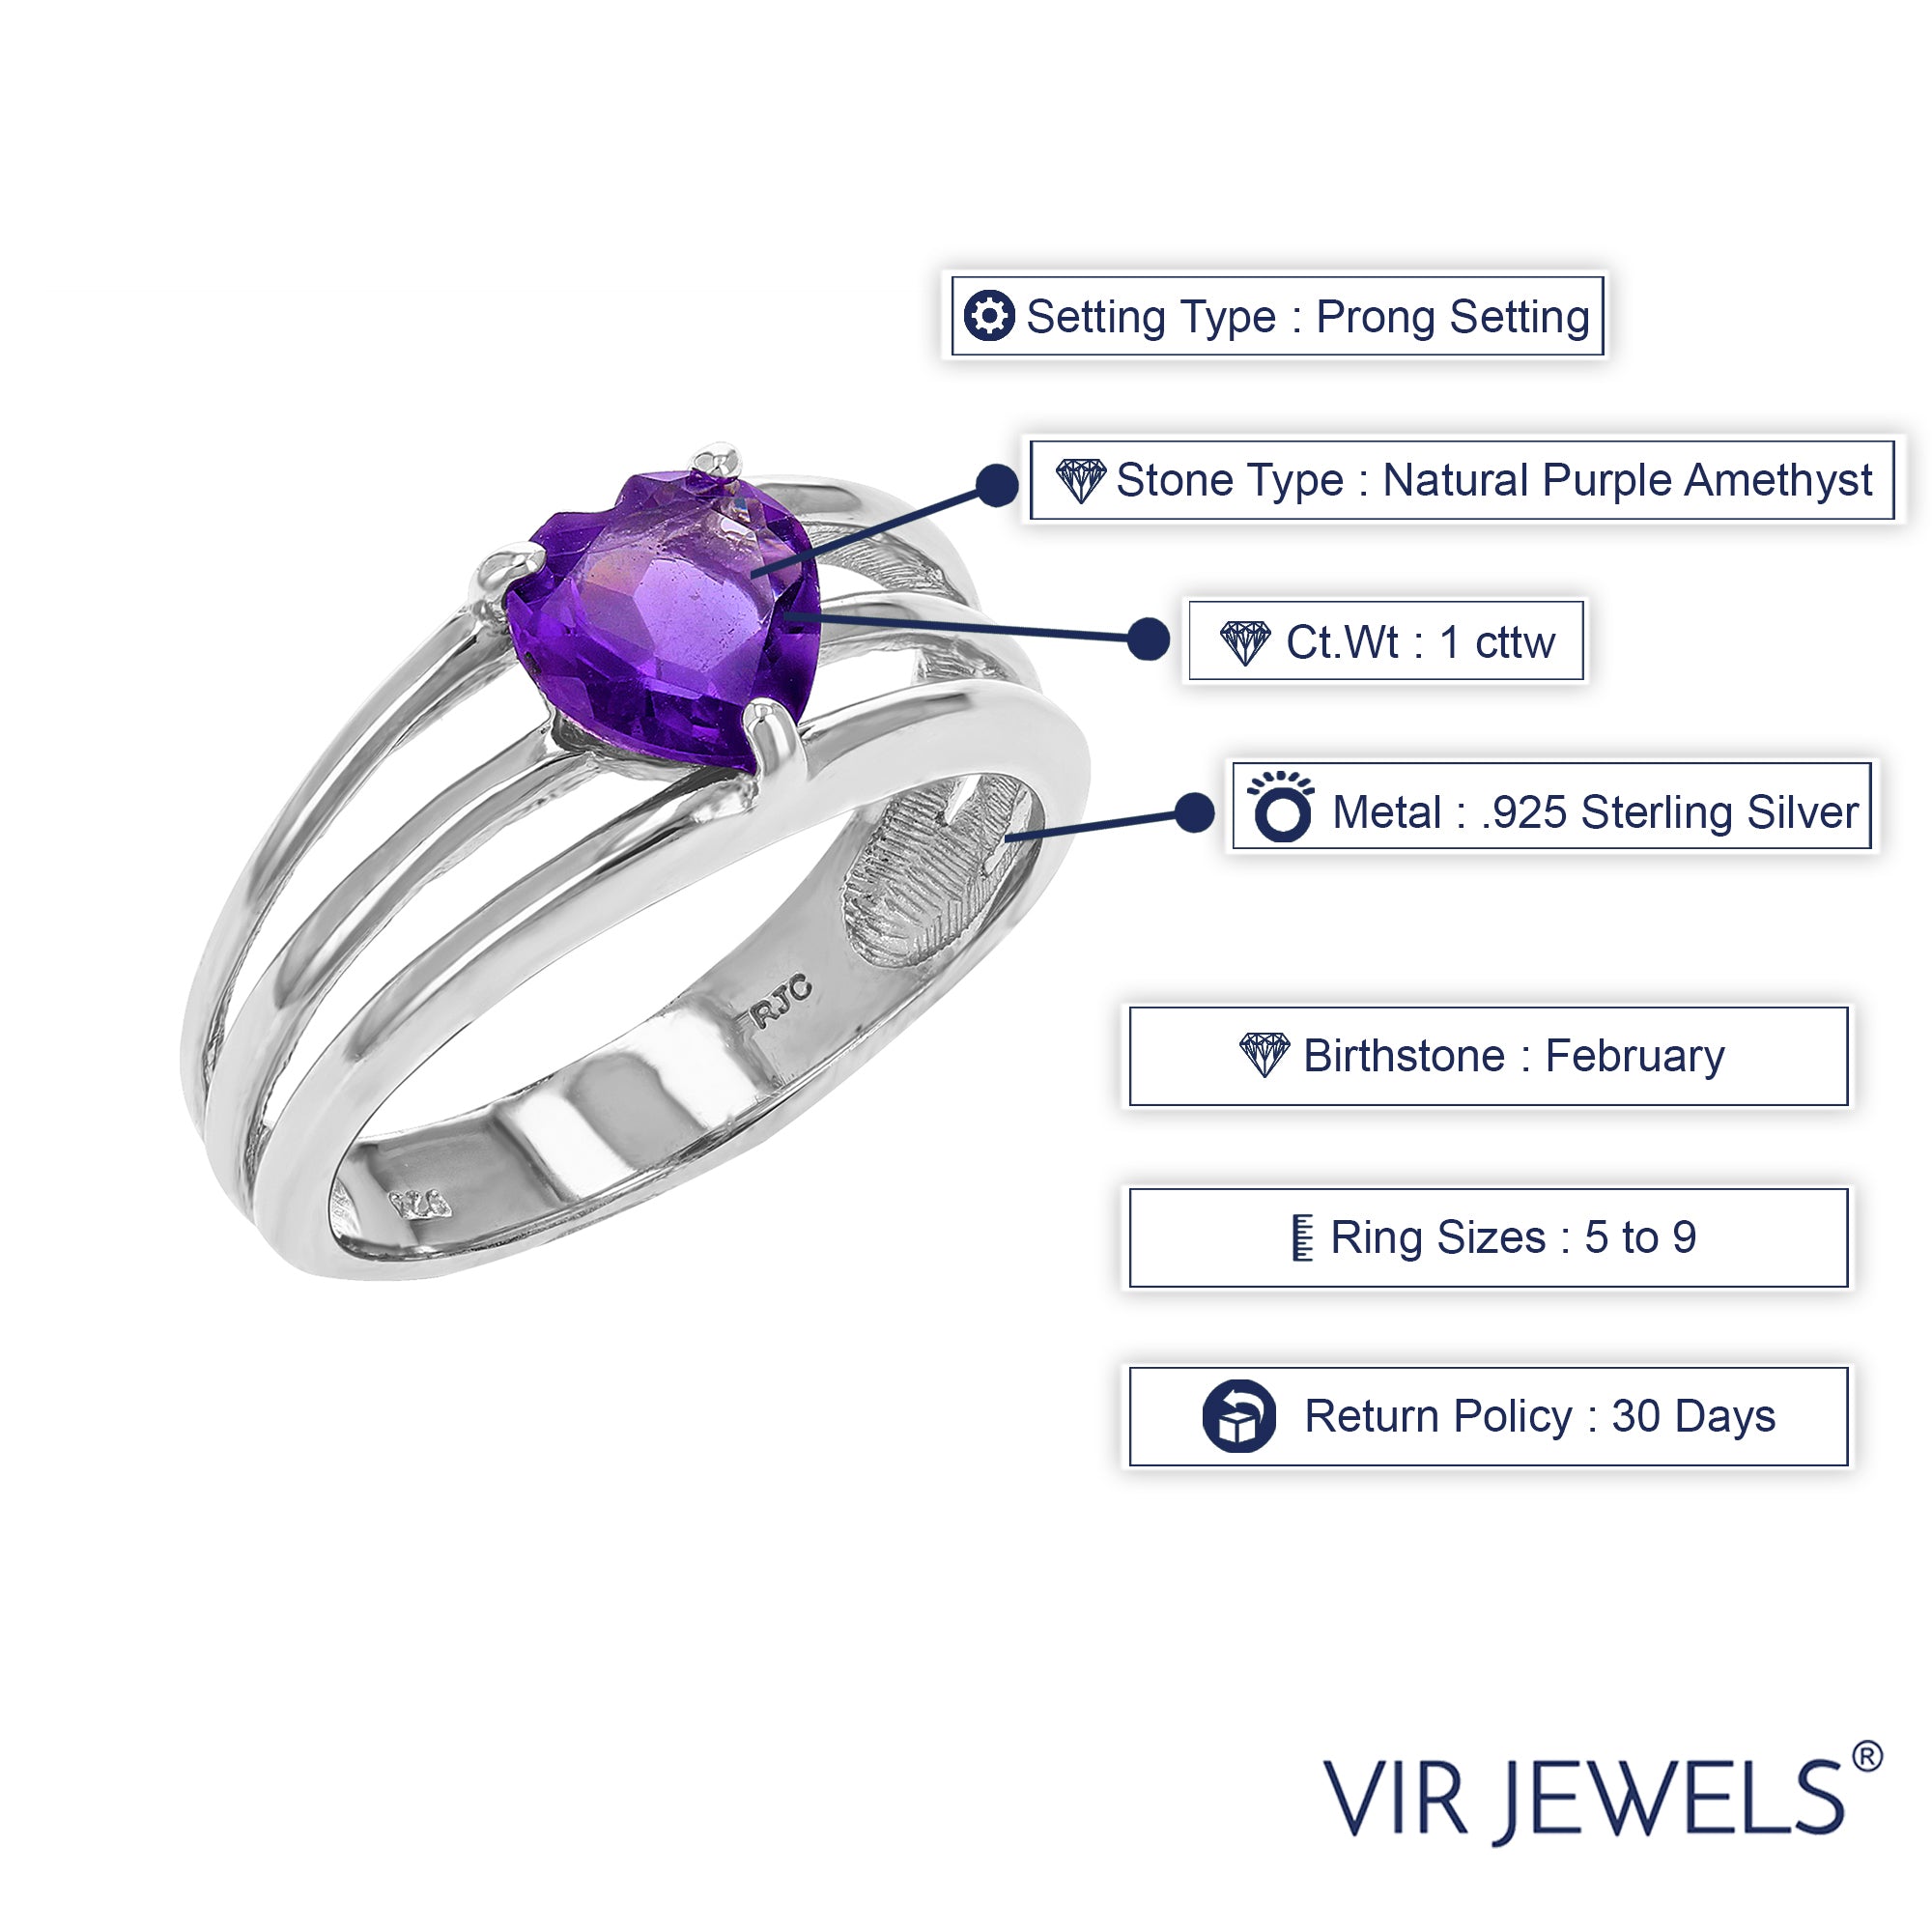 1 cttw Purple Amethyst Heart Ring .925 Sterling Silver with Rhodium Plating 7 MM